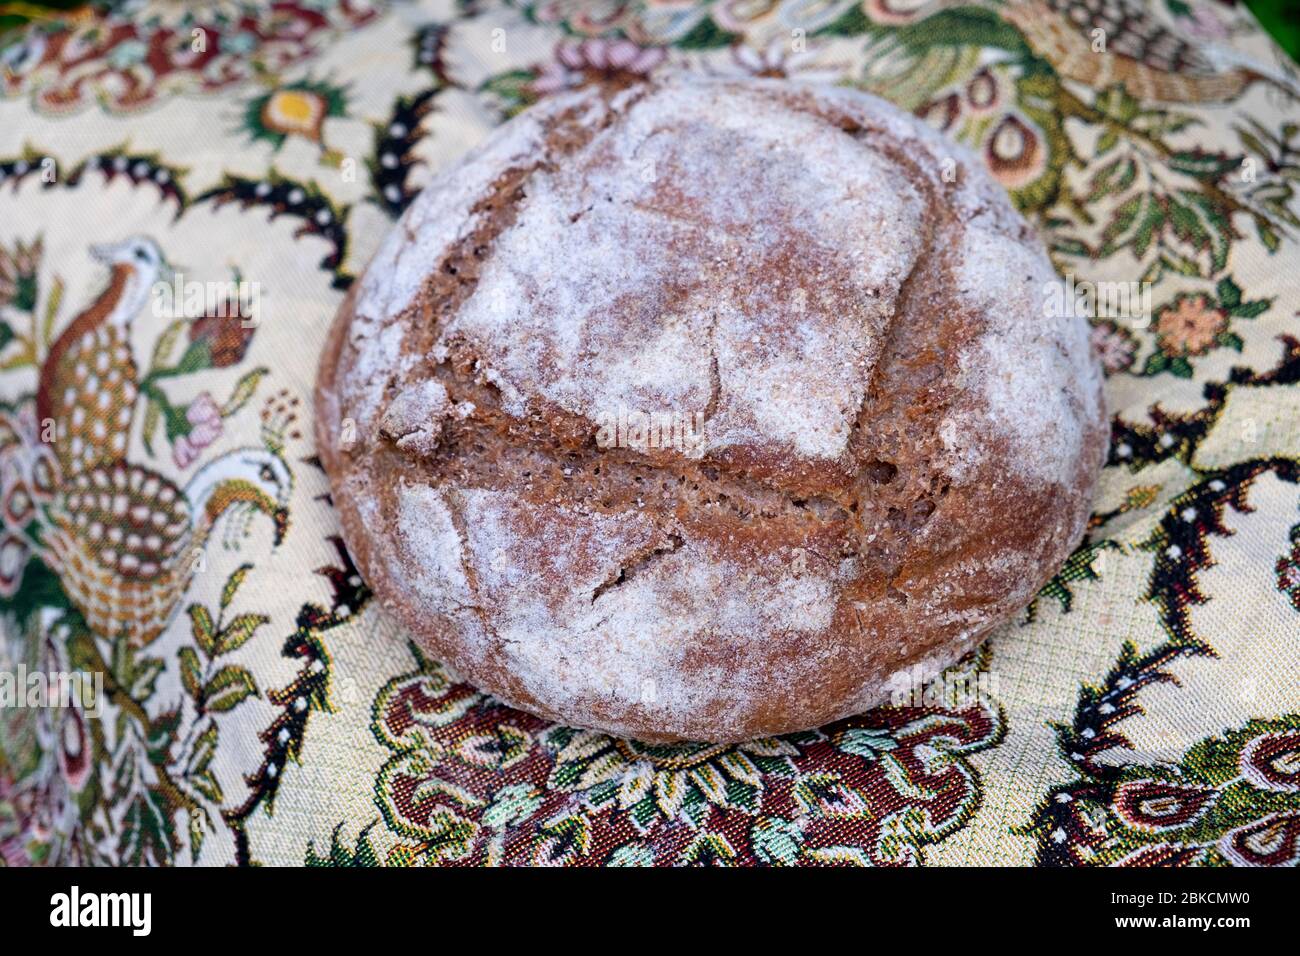 A freshly baked homemade loaf of rye & whole wheat sourdough bread view from above made during Covid 19 Coronavirus outbreak pandemic UK KATHY DEWITT Stock Photo